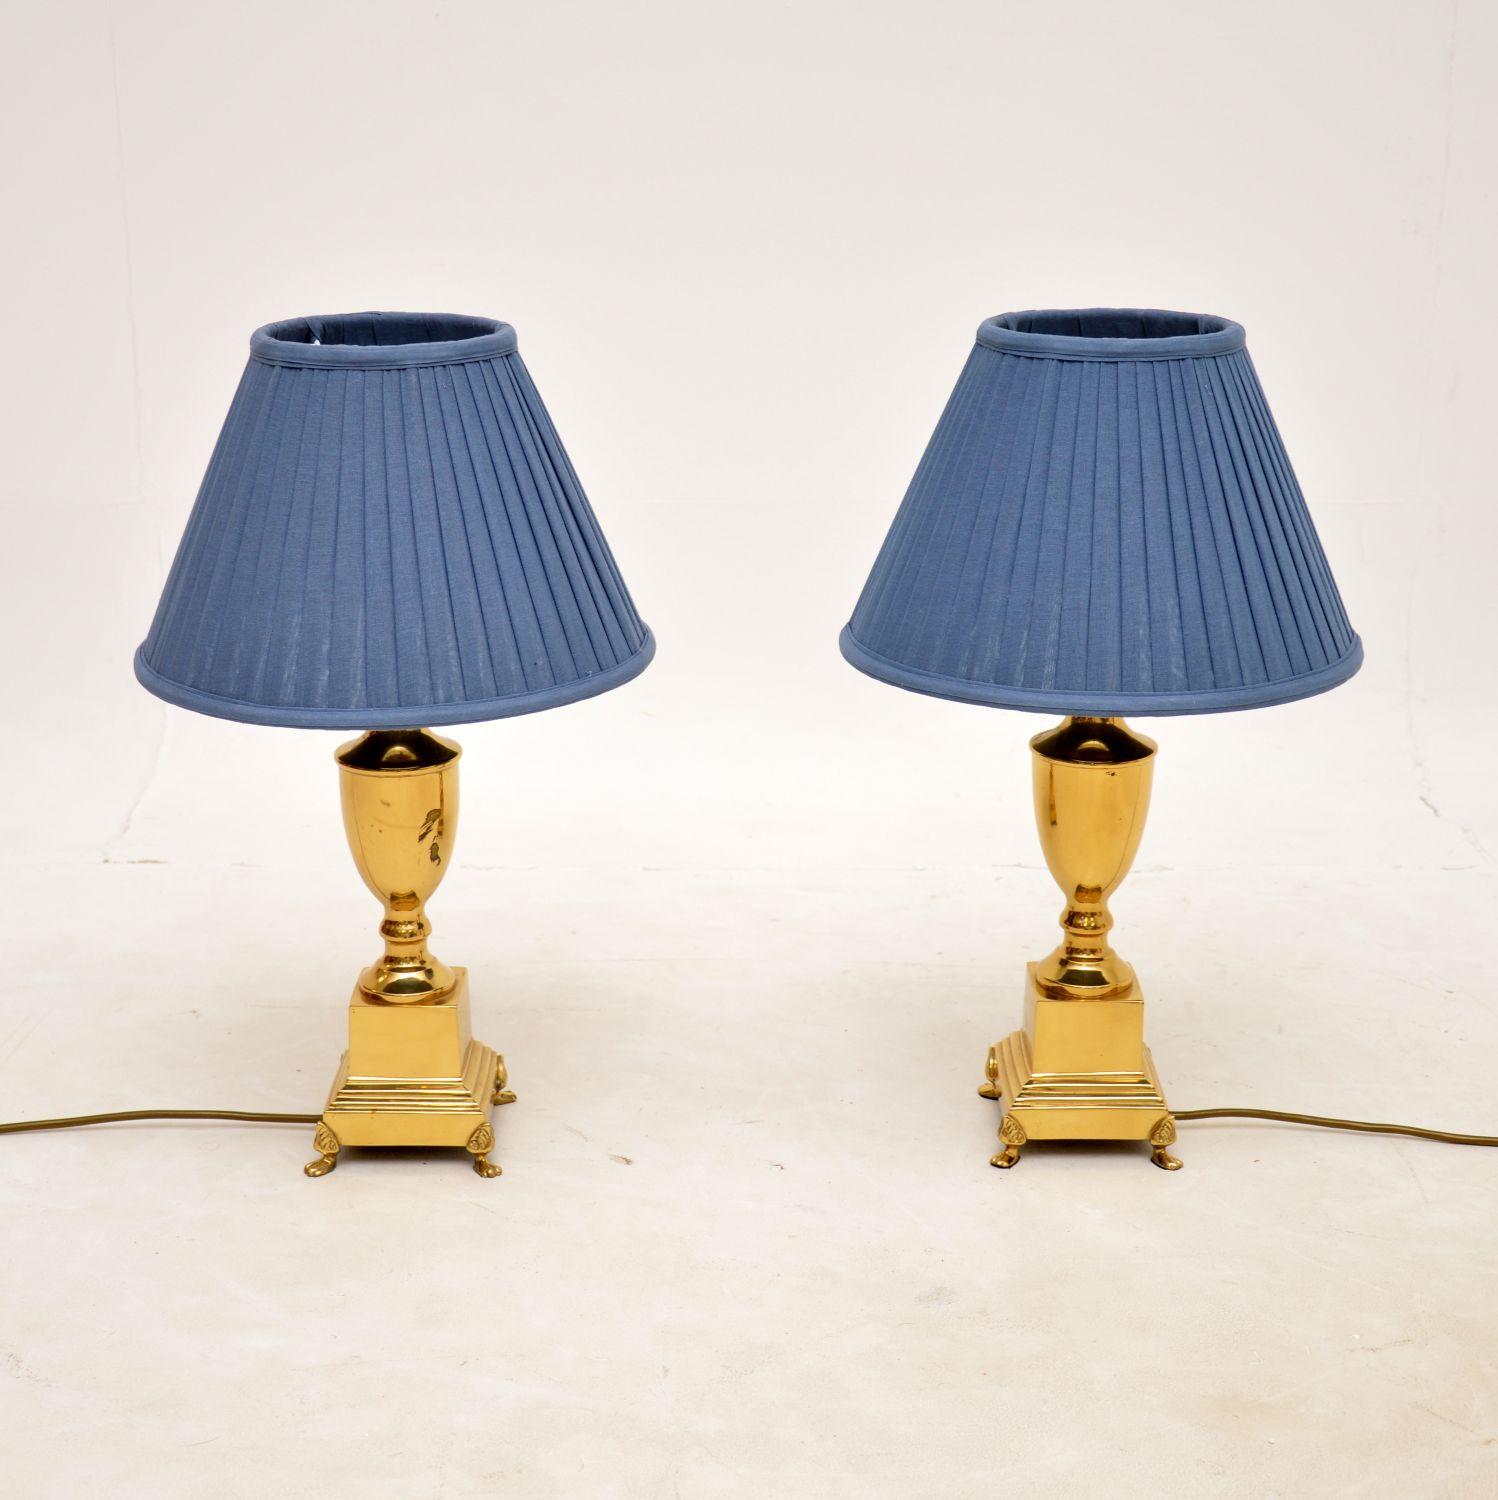 A wonderful pair of vintage solid brass table lamps. They were made in England, they date from around the 1950-60’s.

The quality is outstanding, they are urn shaped and sit on lovely short cabriole shaped feet.

The brass has some minor surface